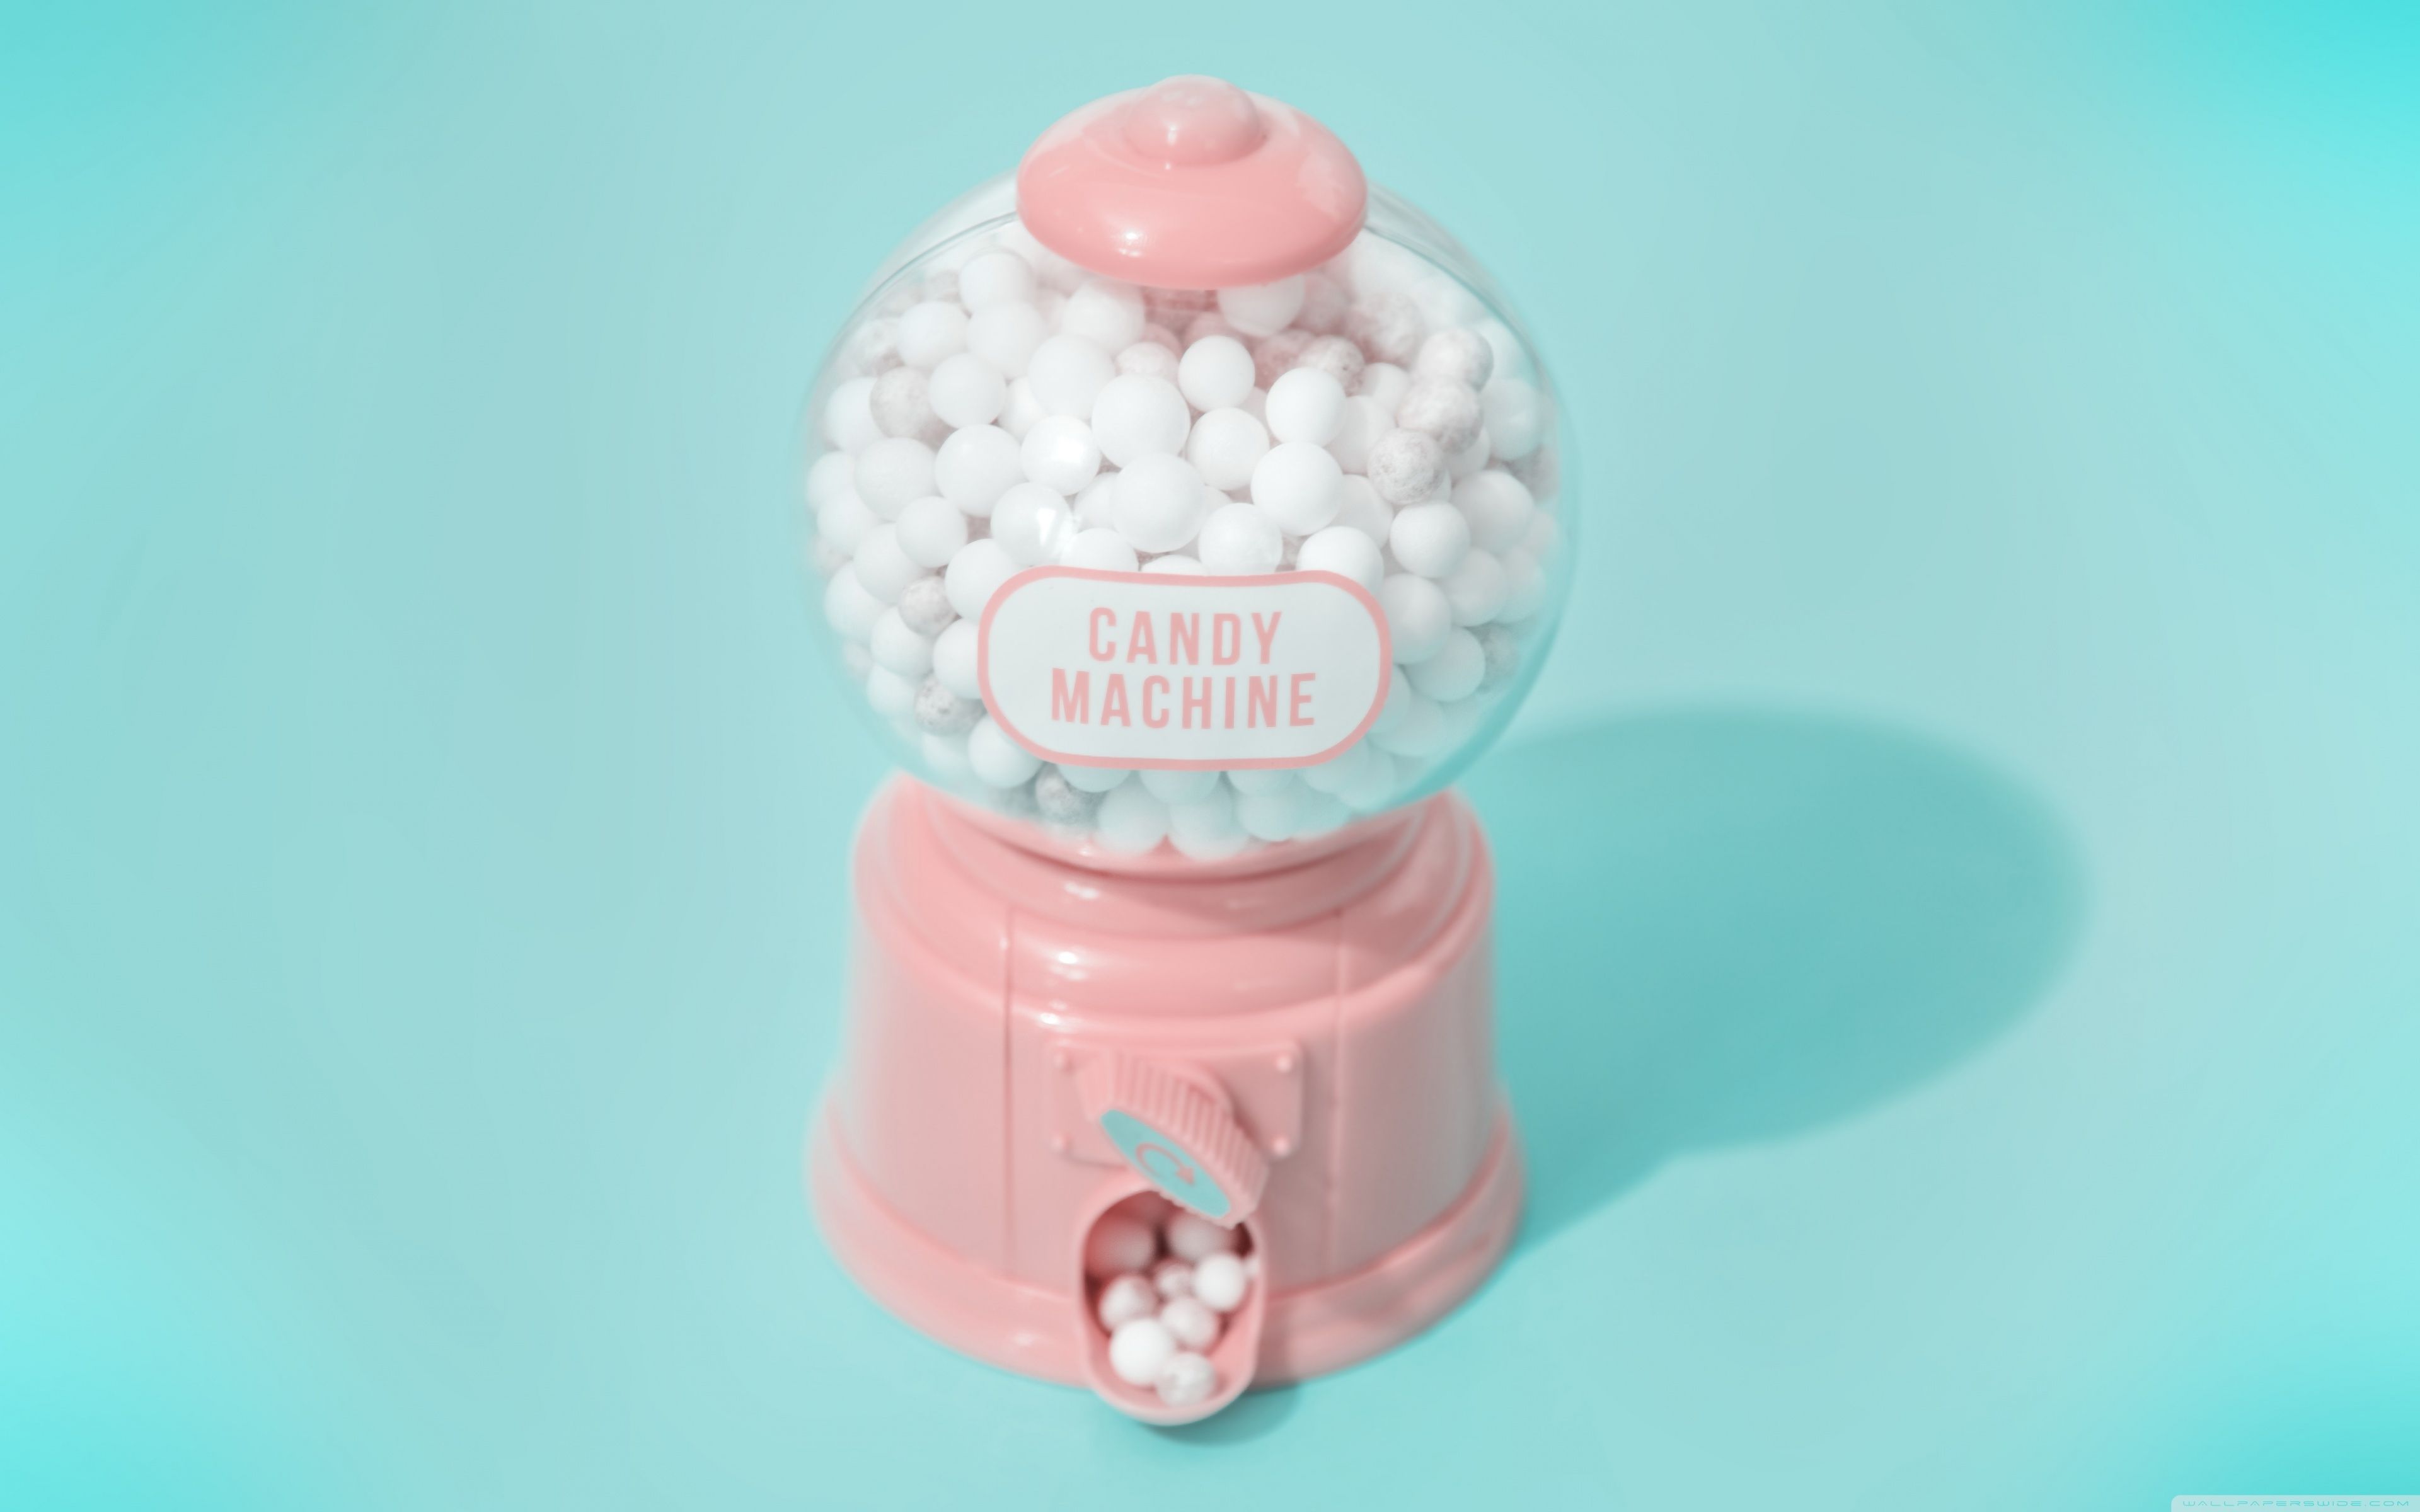 A pink candy dispenser with white candy balls - Candy